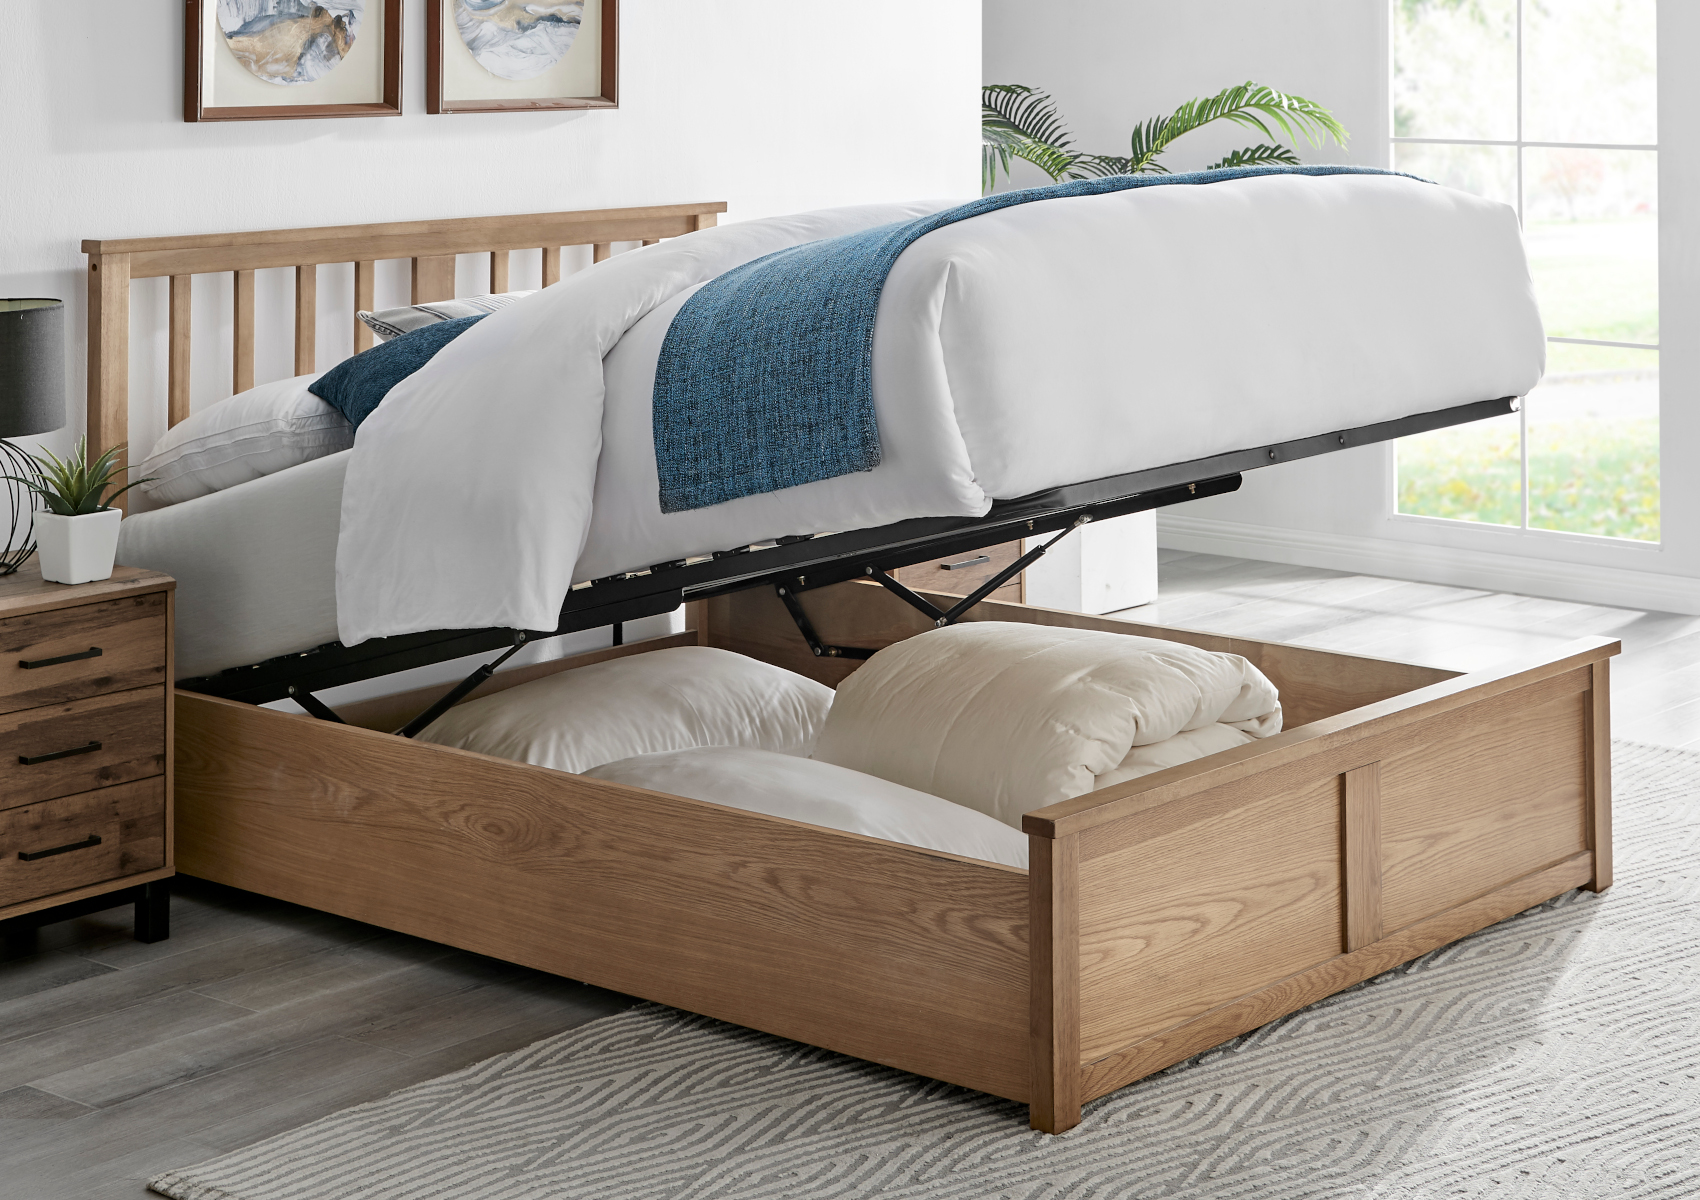 View Oakland Wooden Ottoman Storage Bed Time4Sleep information